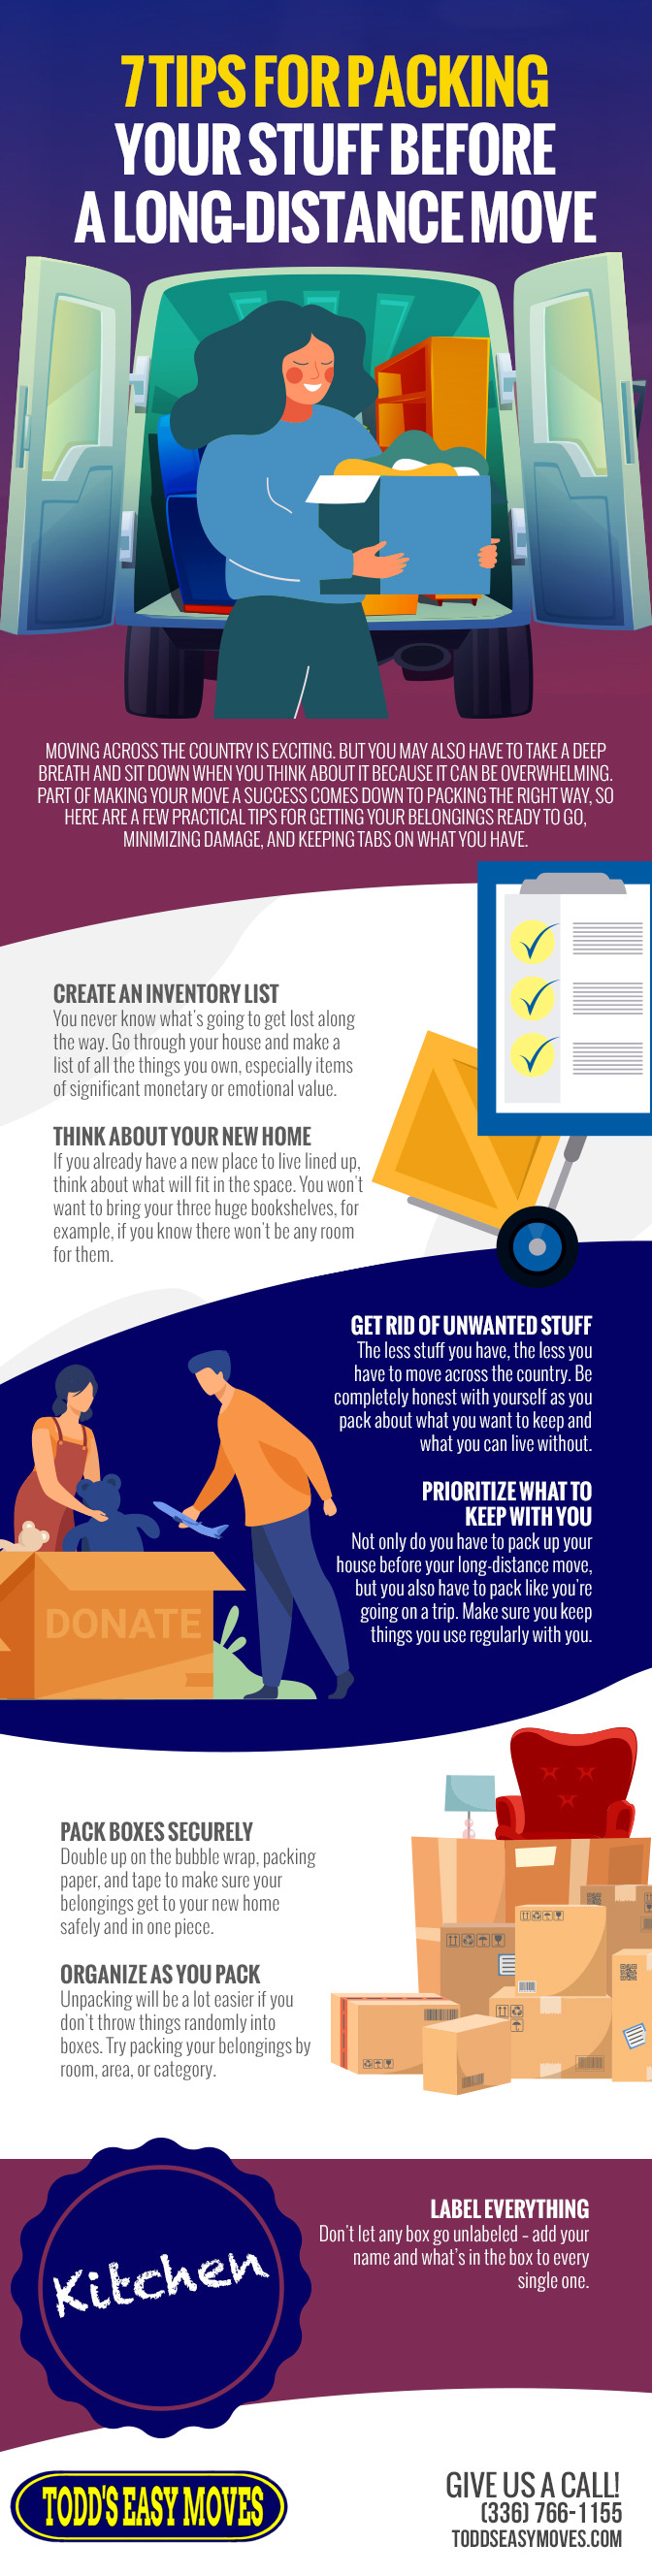 7 Tips for Packing Your Stuff Before a Long-Distance Move [infographic]